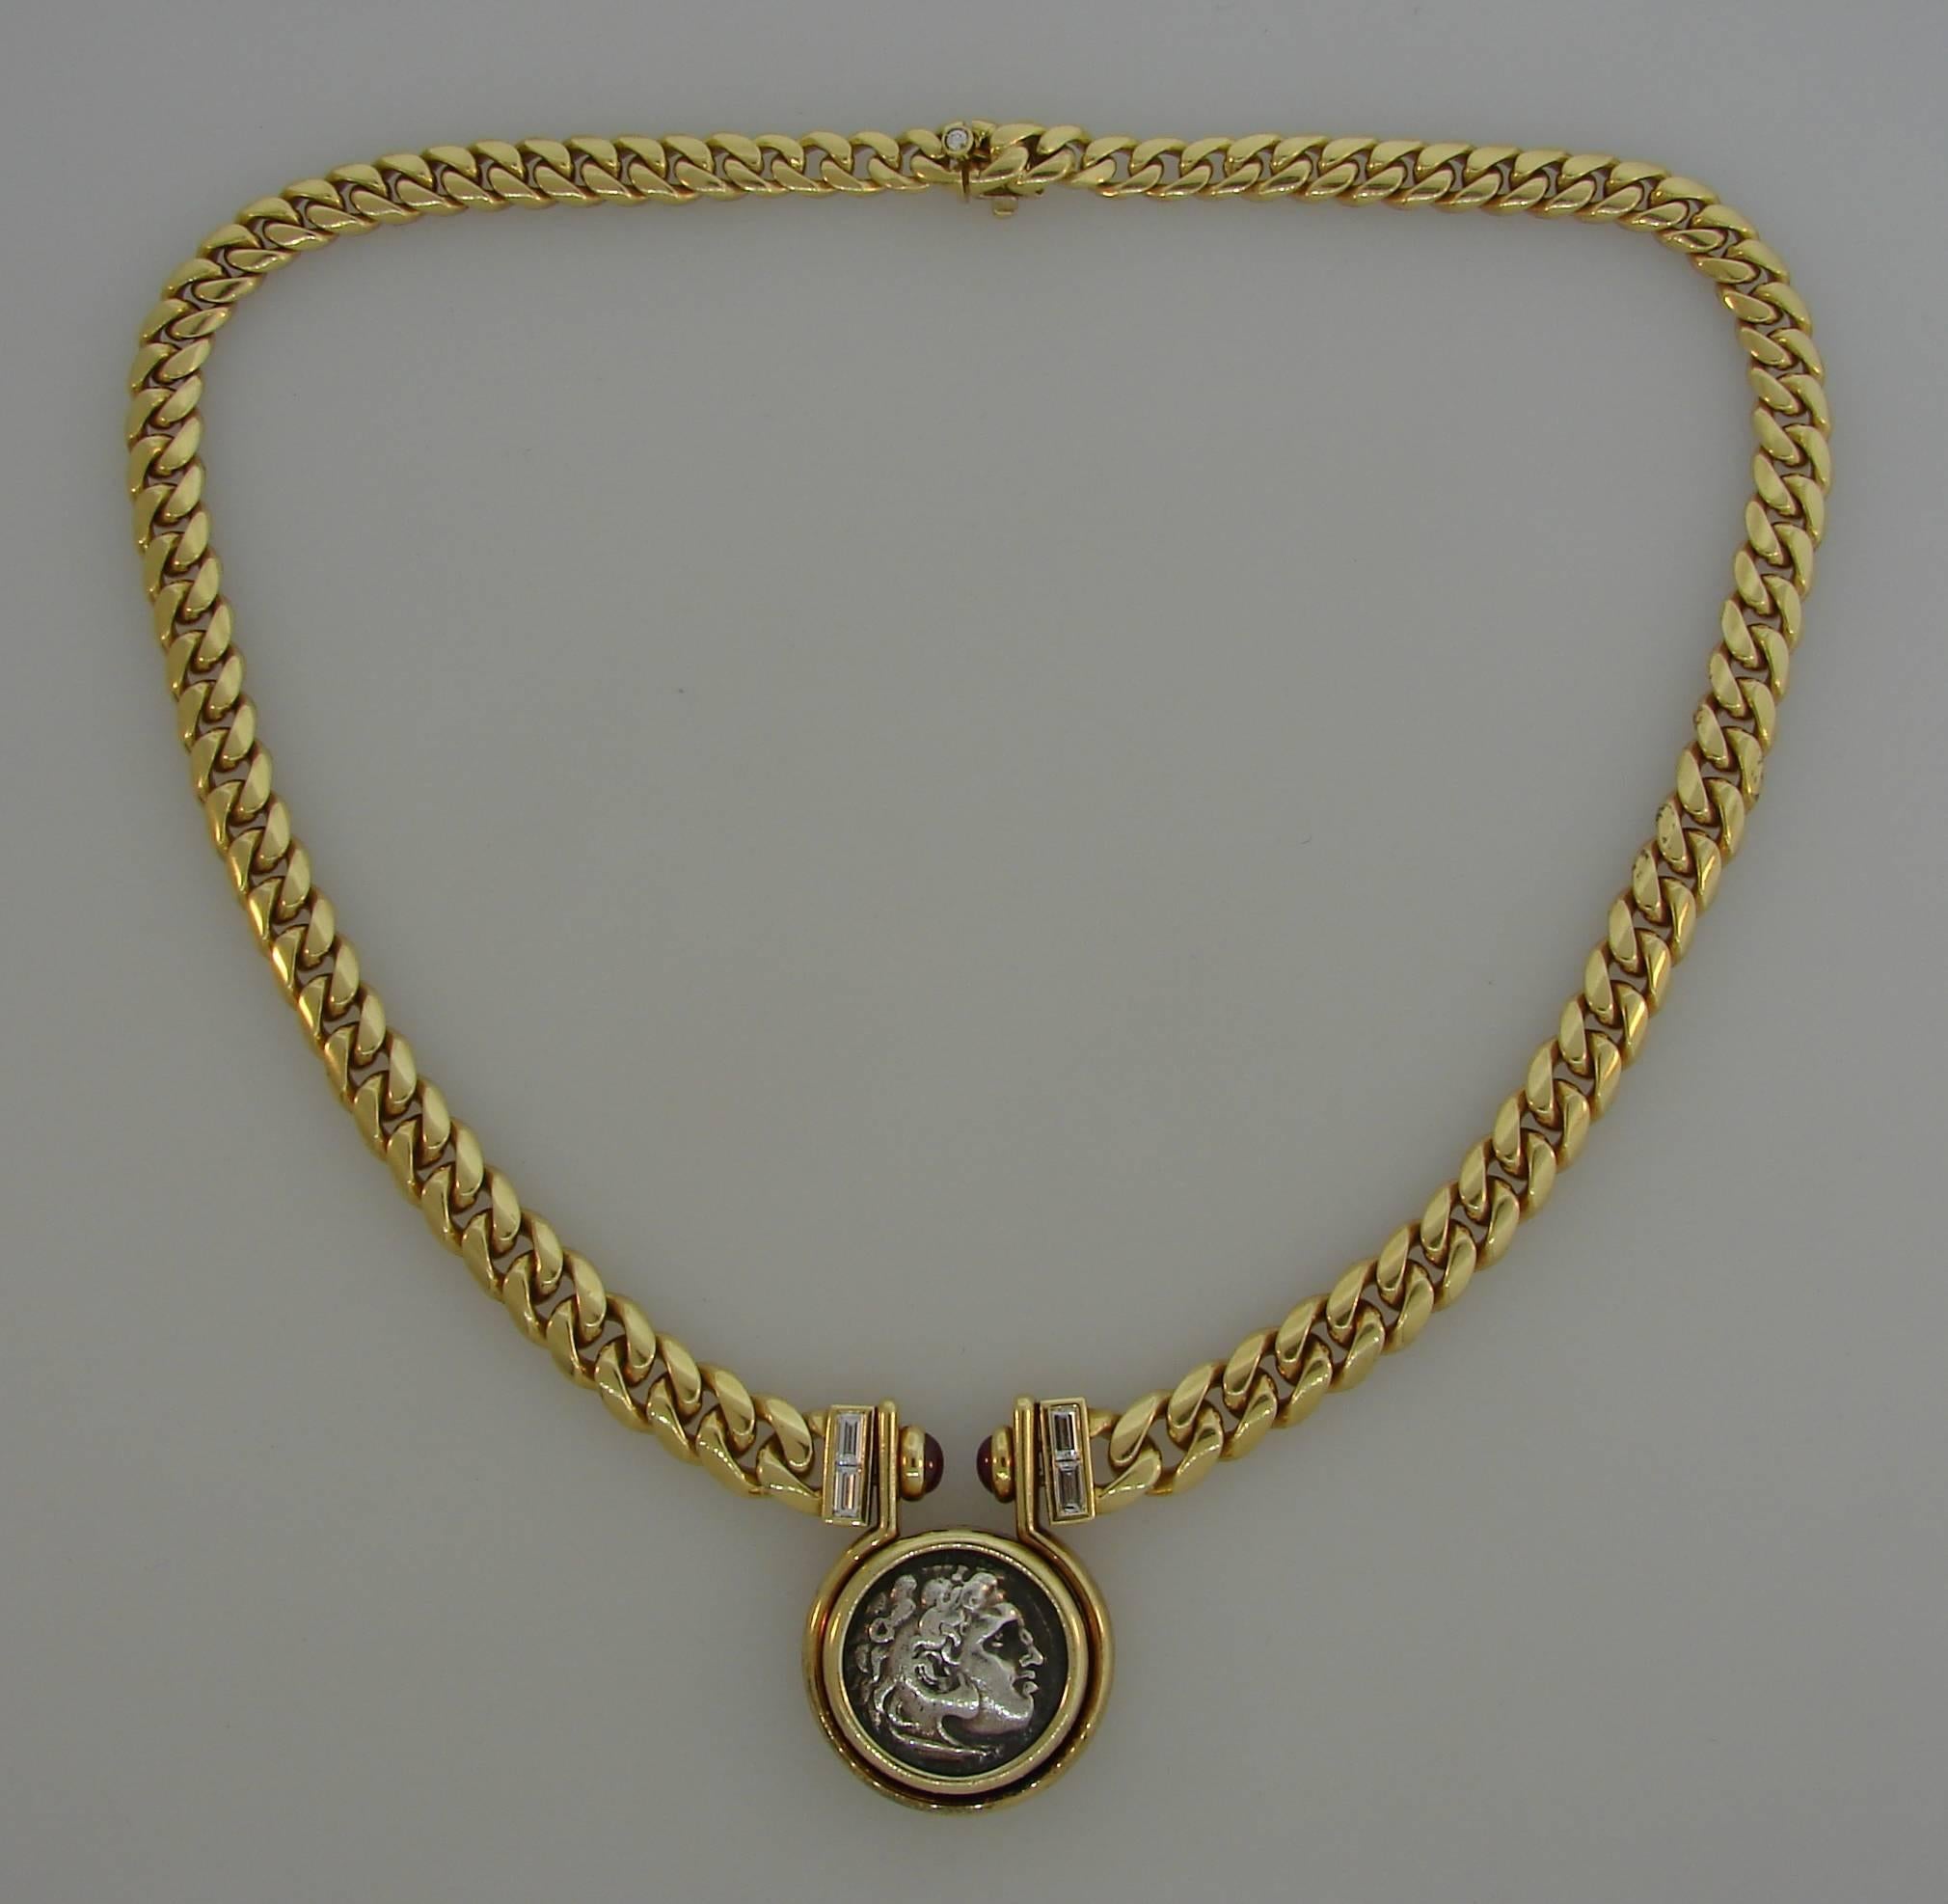 Signature Bulgari coin necklace with an ancient Roman coin dated 336-323 AV. J.C. The coin is a silver drachme with Alexander The Great profile. Bold, elegant and wearable, the necklace is a great addition to your jewelry collection.
The necklace is